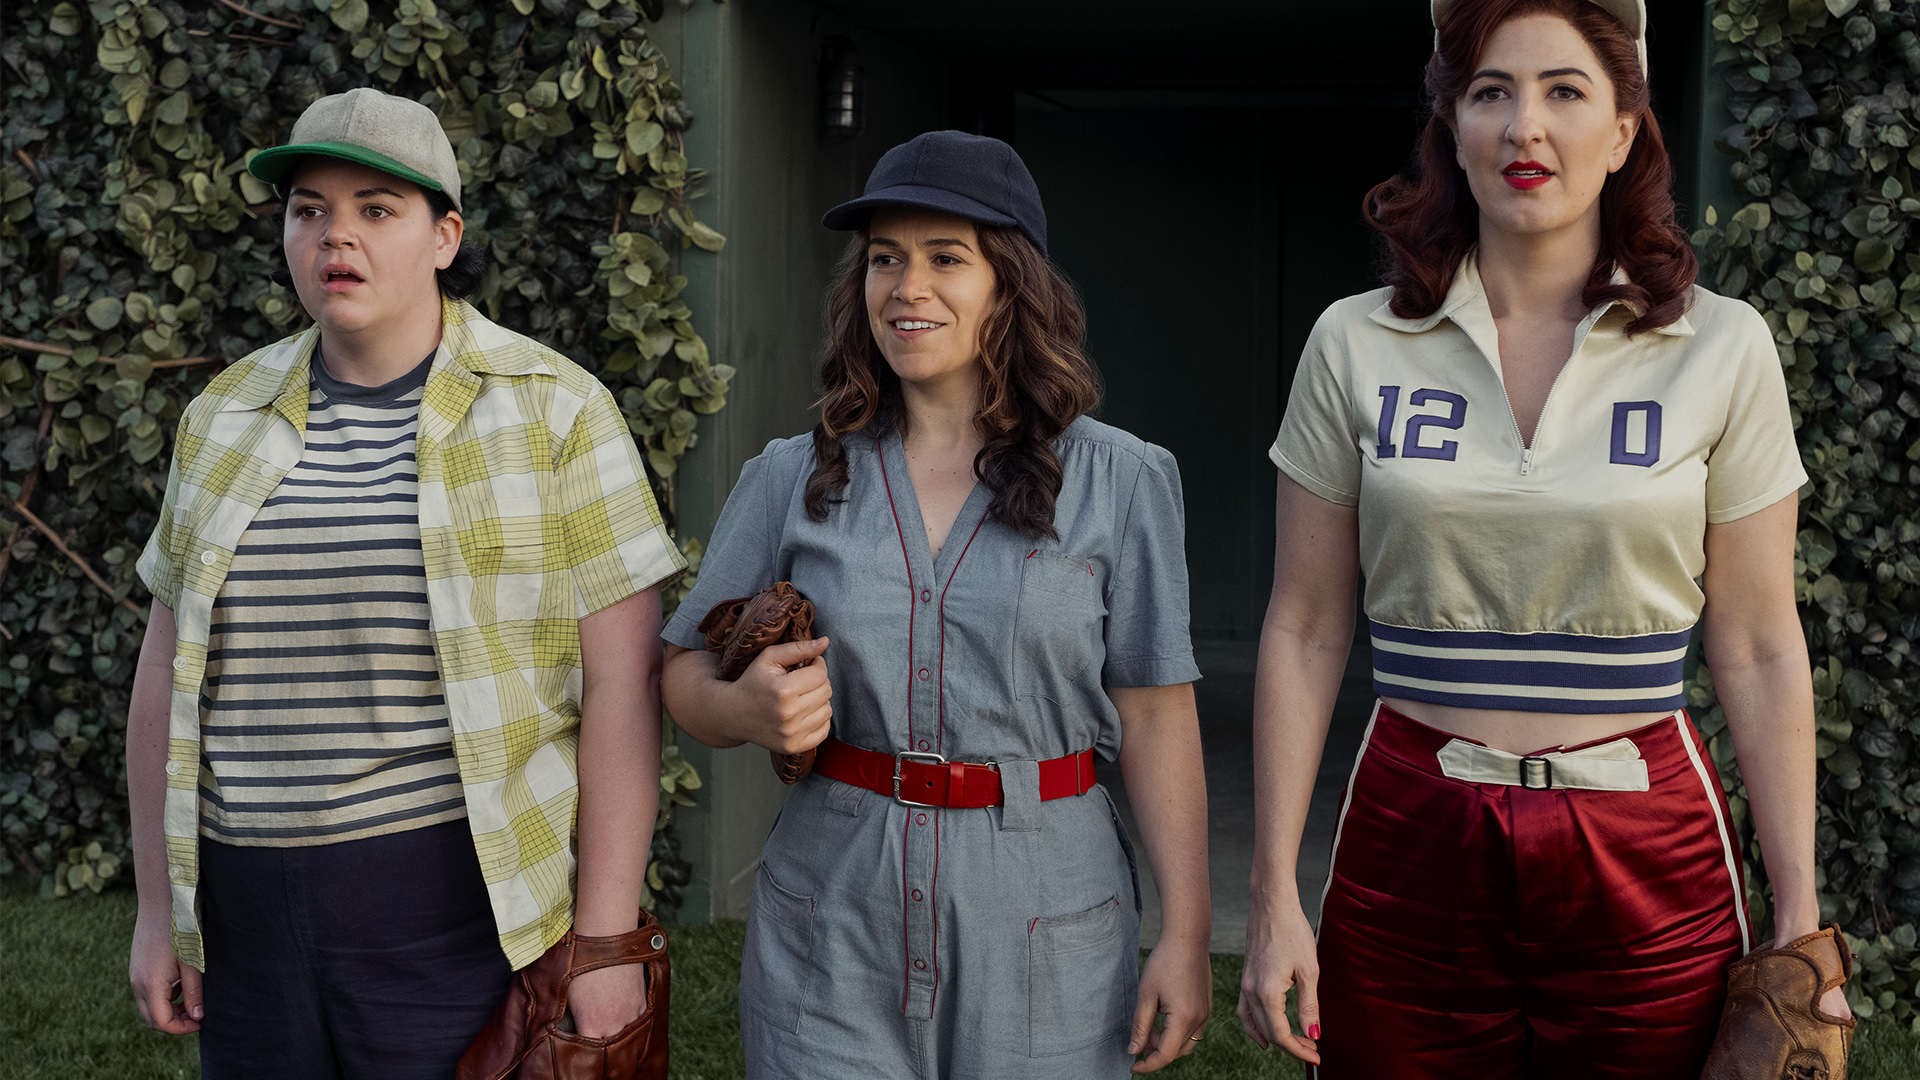 Melanie Field, Abbi Jacobson and D'Arcy Carden in A League of Their Own. Image: Sky